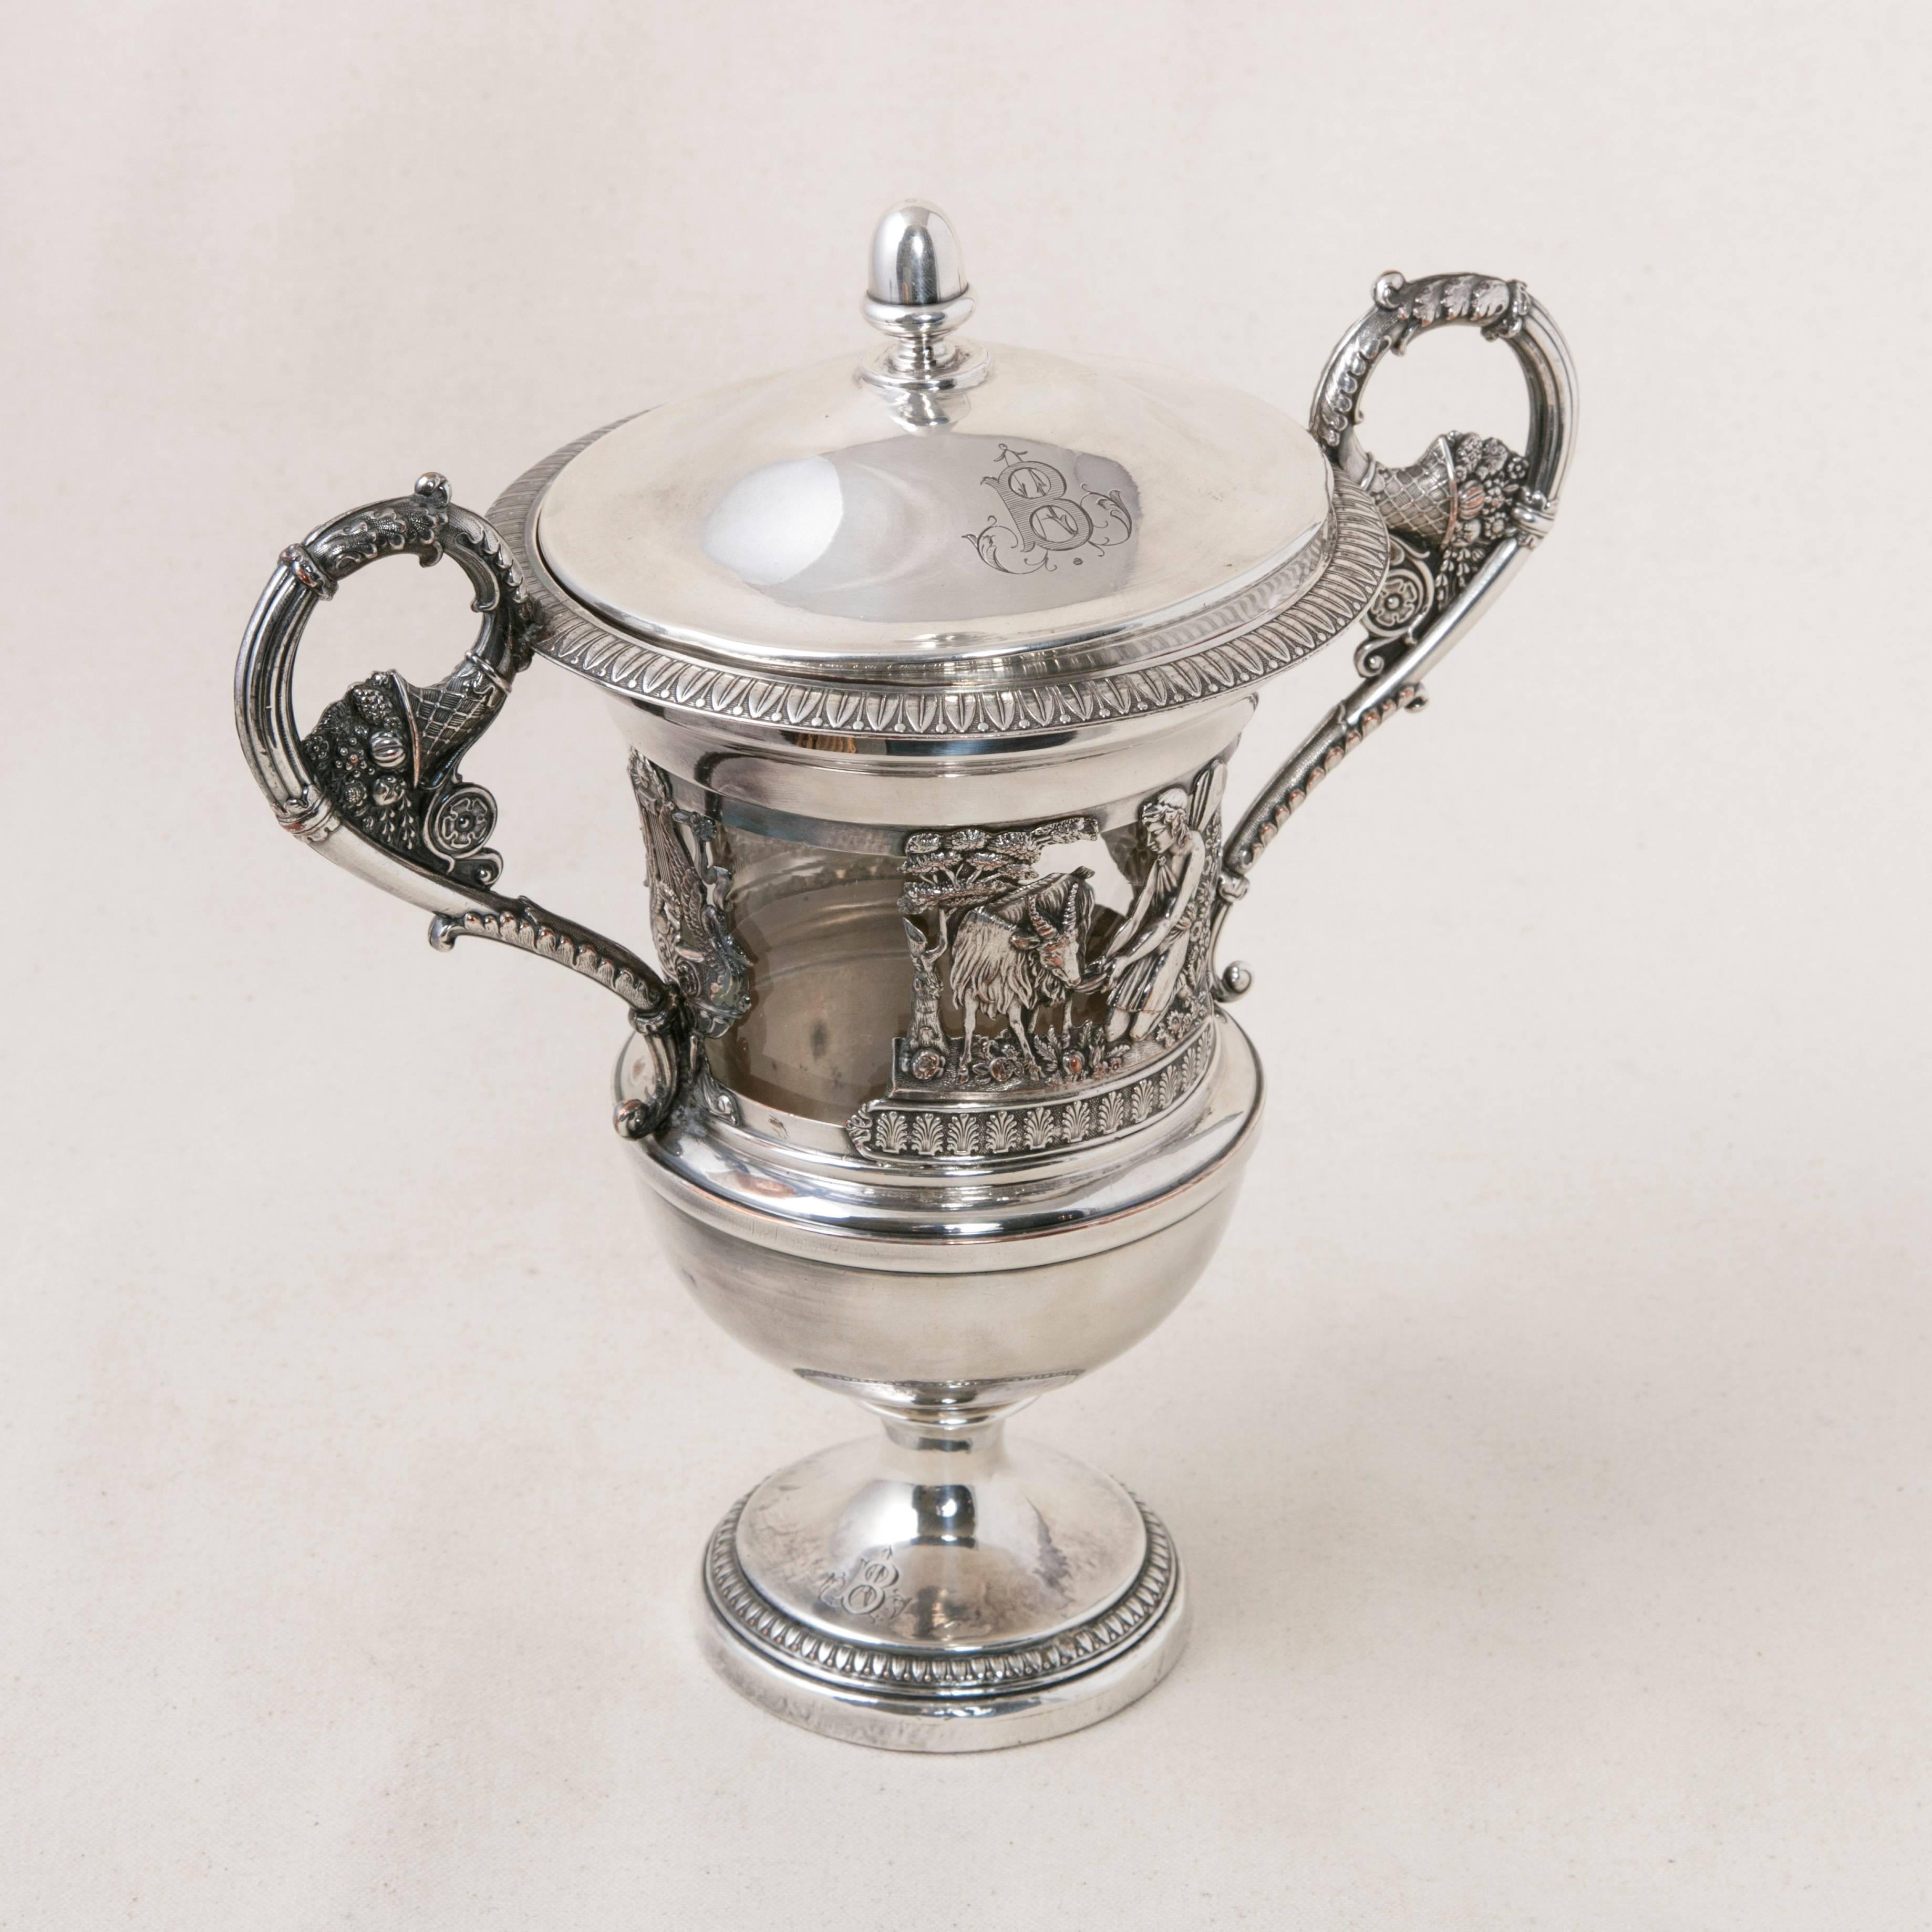 Originally used to present fine jam at tea time, this 19th century, English silver plate serving piece has its original crystal insert and silver lid. Opposing swans with outstretched wings form the sides of a Classic lyre that support two handles